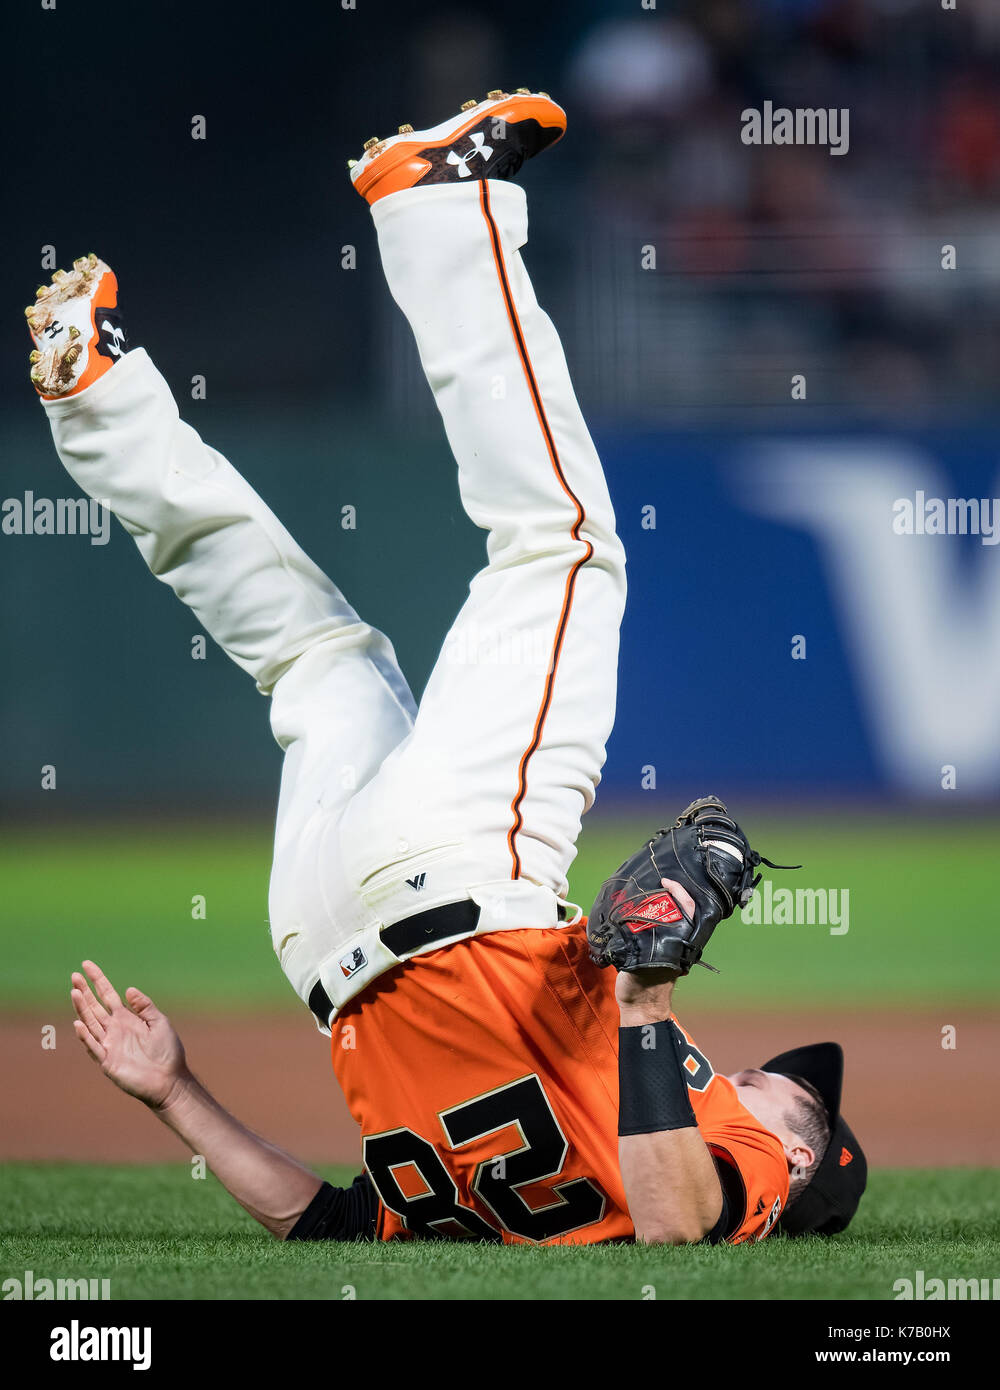 San Francisco, California, USA. 15th Sep, 2017. San Francisco Giants first baseman Buster Posey (28) catches a pop up to end the first inning, during a MLB game between the Arizona Diamondbacks and the San Francisco Giants at AT&T Park in San Francisco, California. Valerie Shoaps/CSM/Alamy Live News Stock Photo